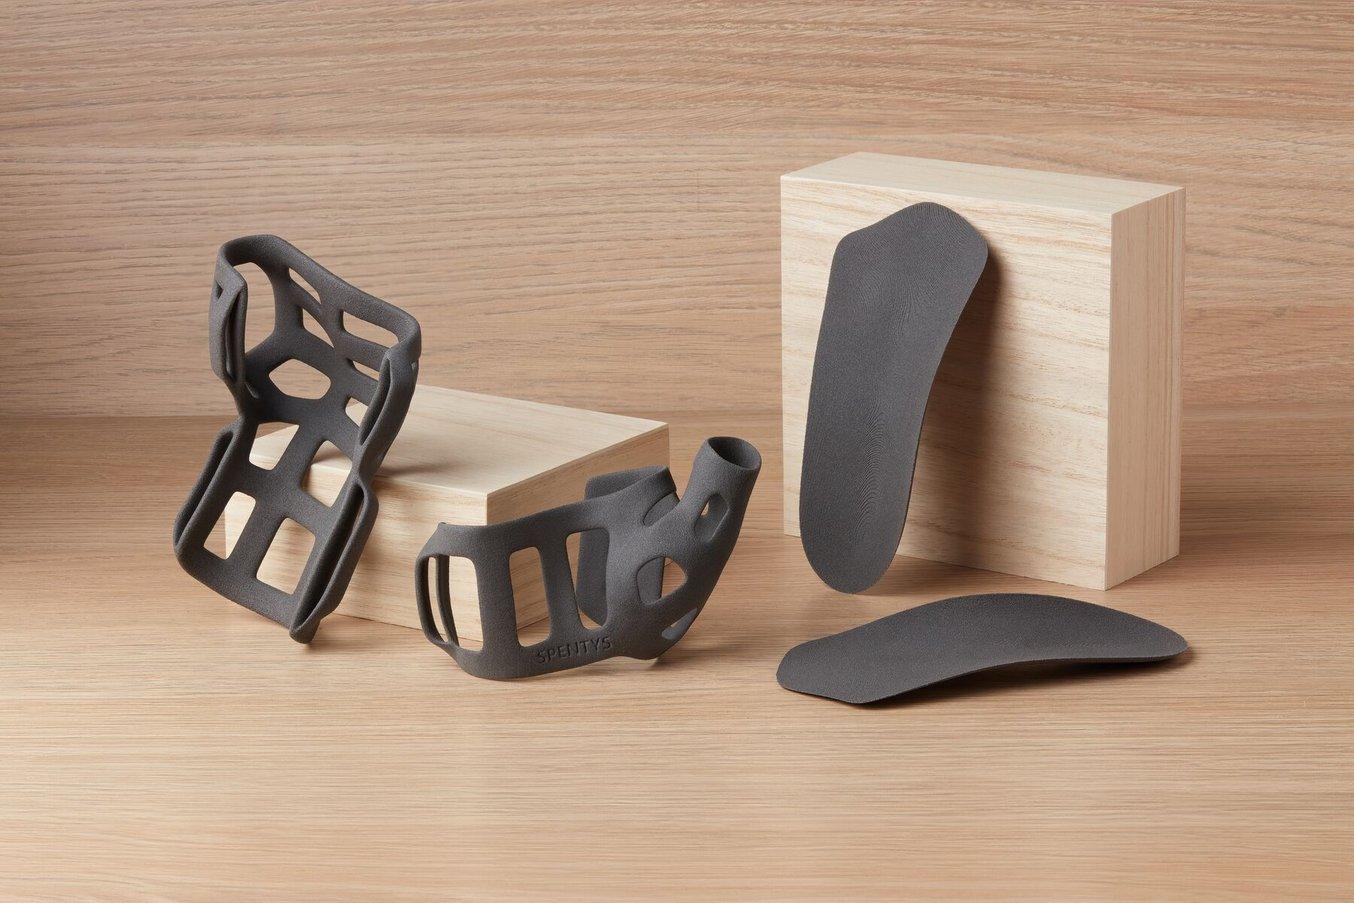 polypropylene powder sls 3d printed medical devices on a wooden background, a 3d printed thumb brace and orthoses